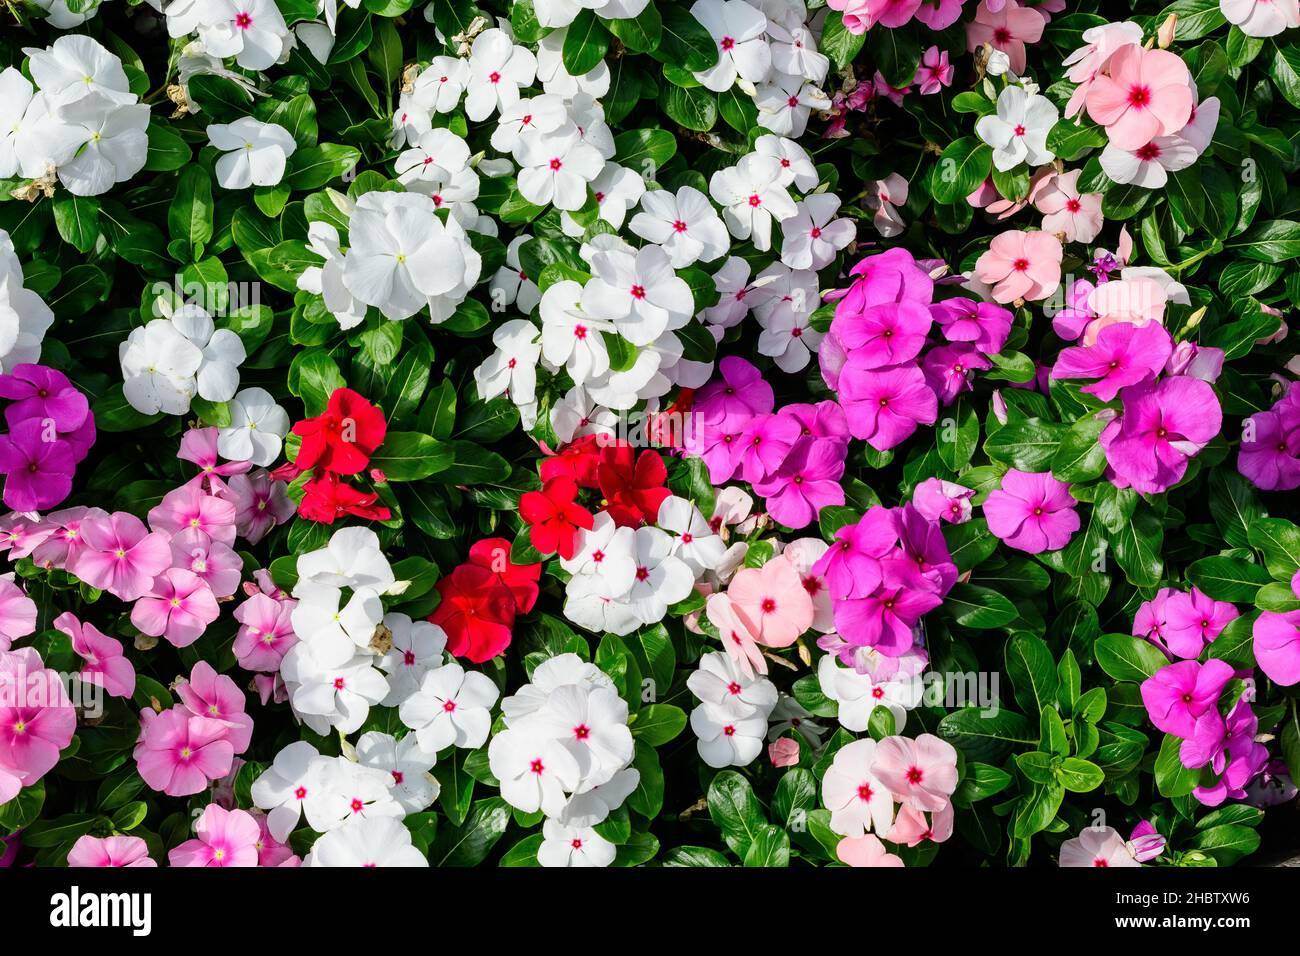 Large garden pot with vivid pink, red and white Impatiens walleriana flowers known as  busy Lizzie, balsam, sultana, or impatiens, in full bloom in a Stock Photo